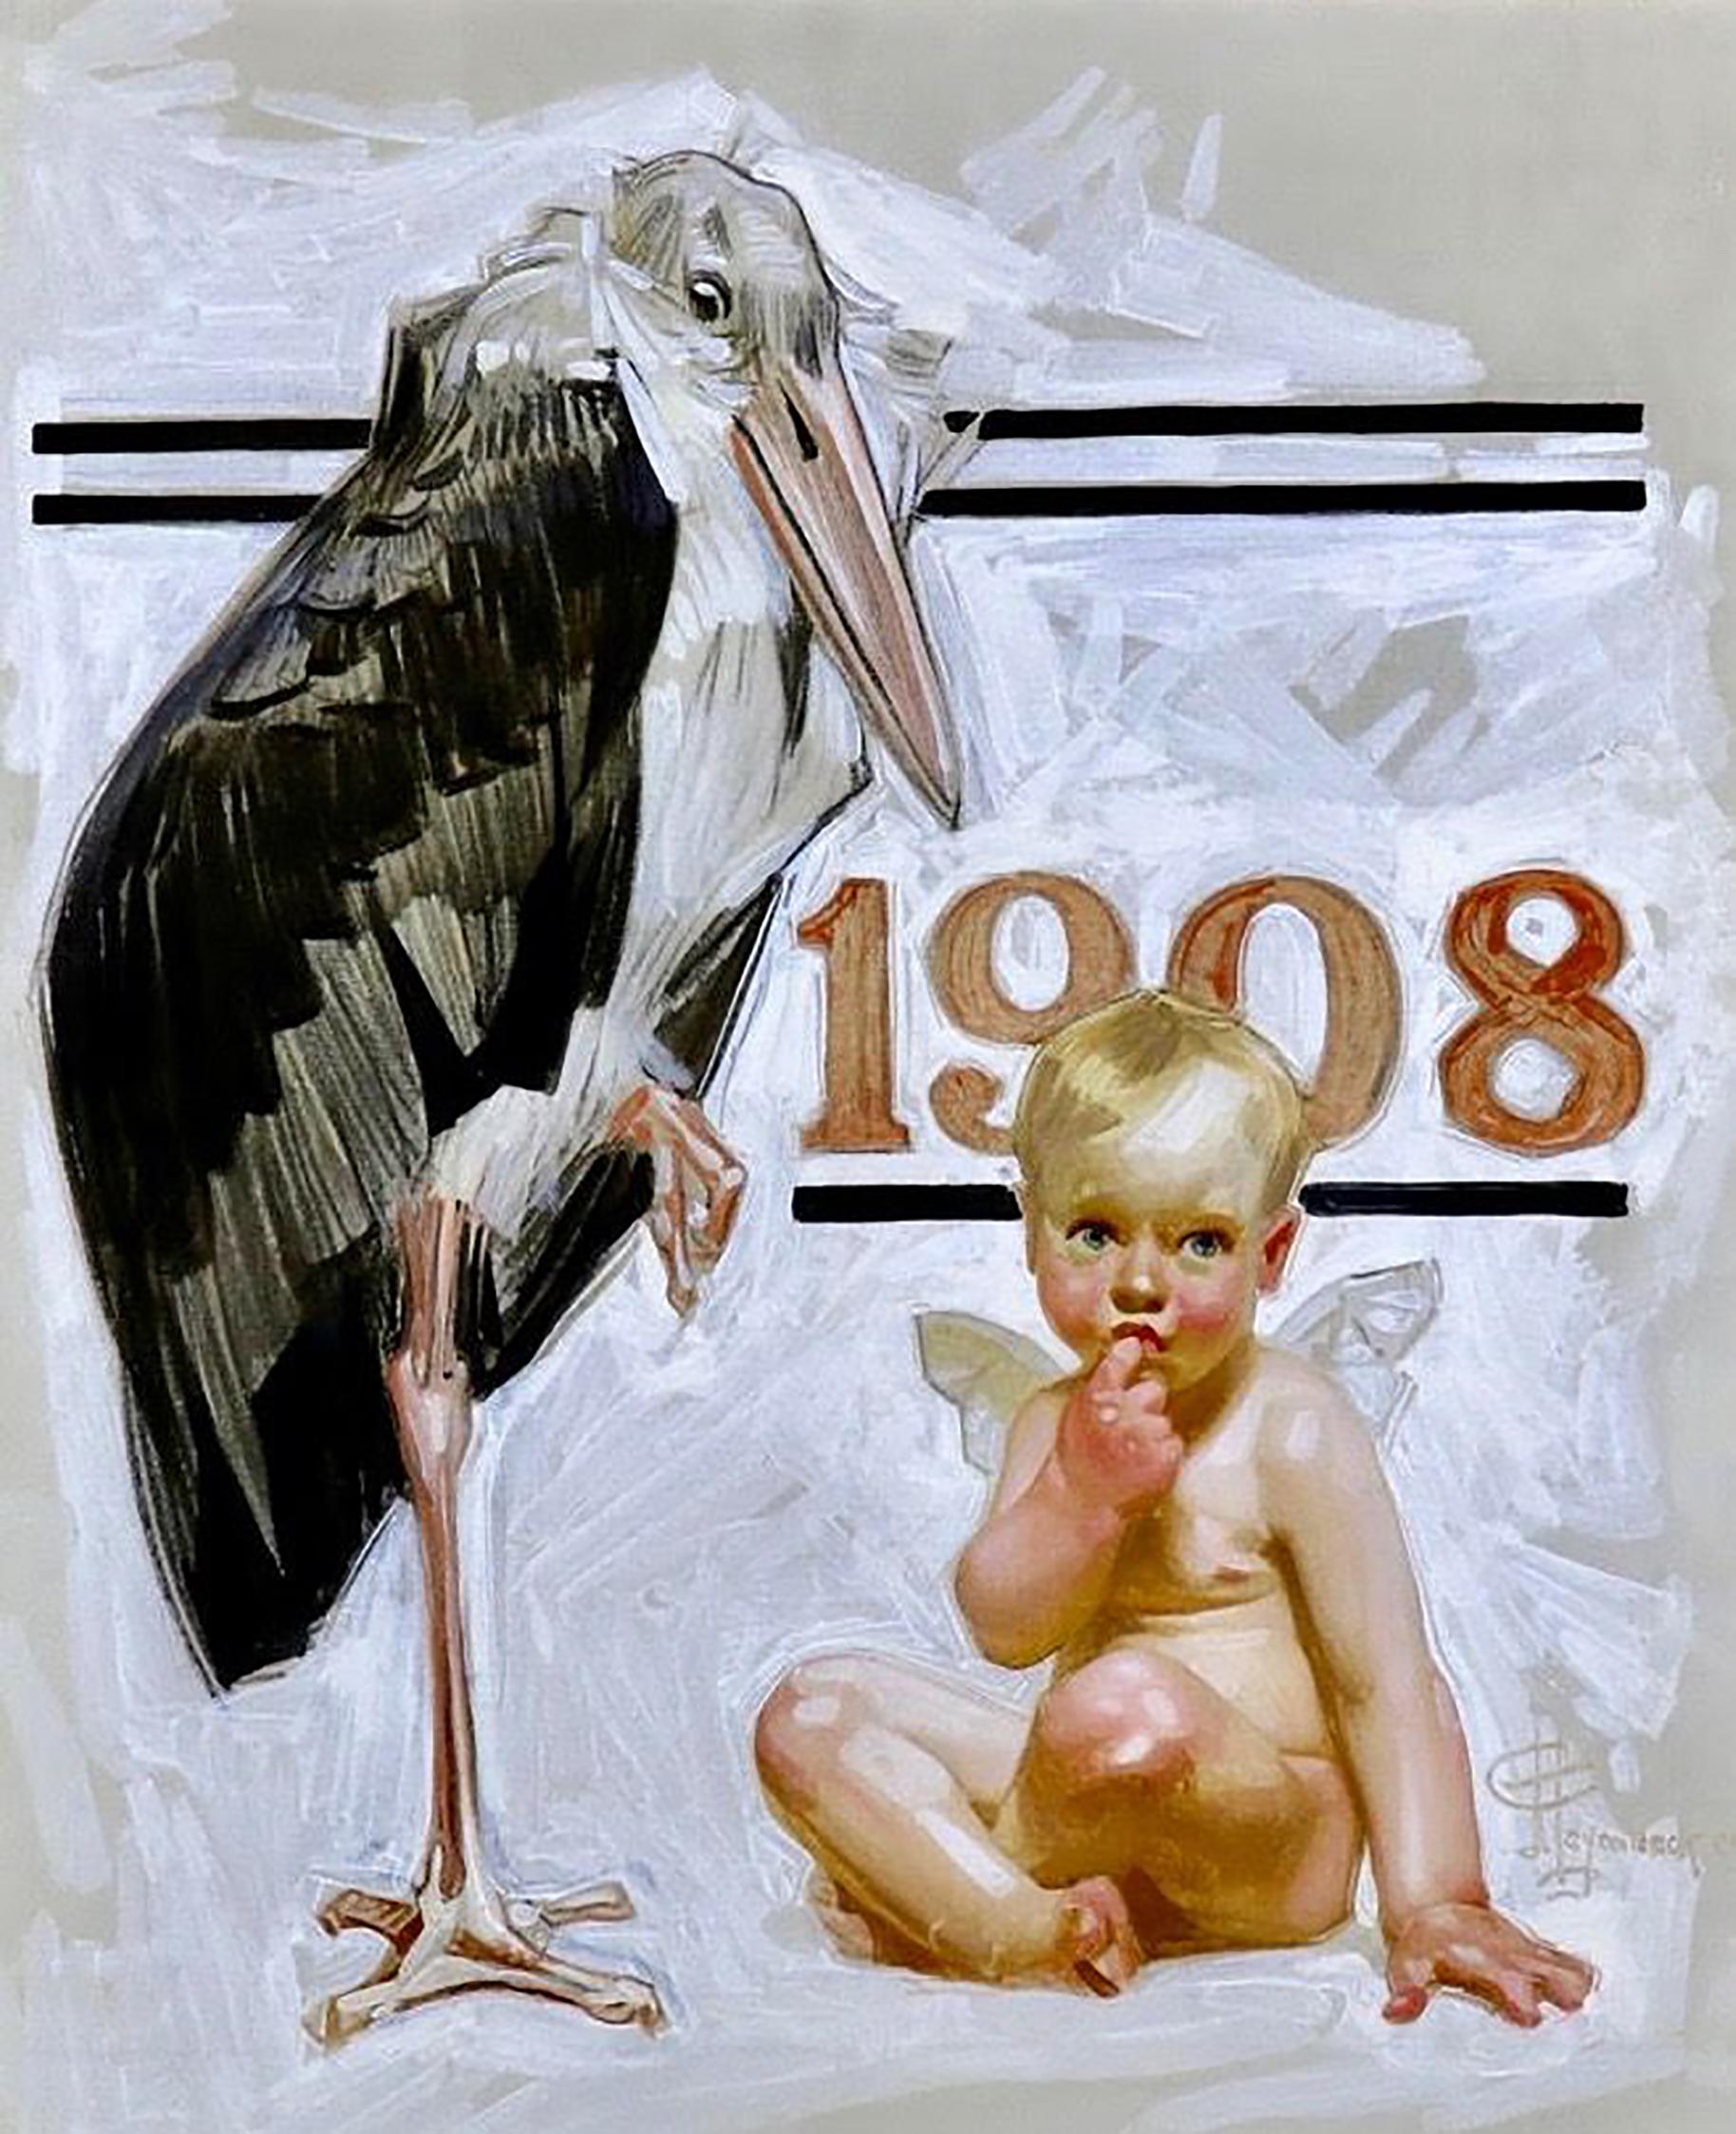 New Years Baby, Saturday Evening Post Cover, 1907